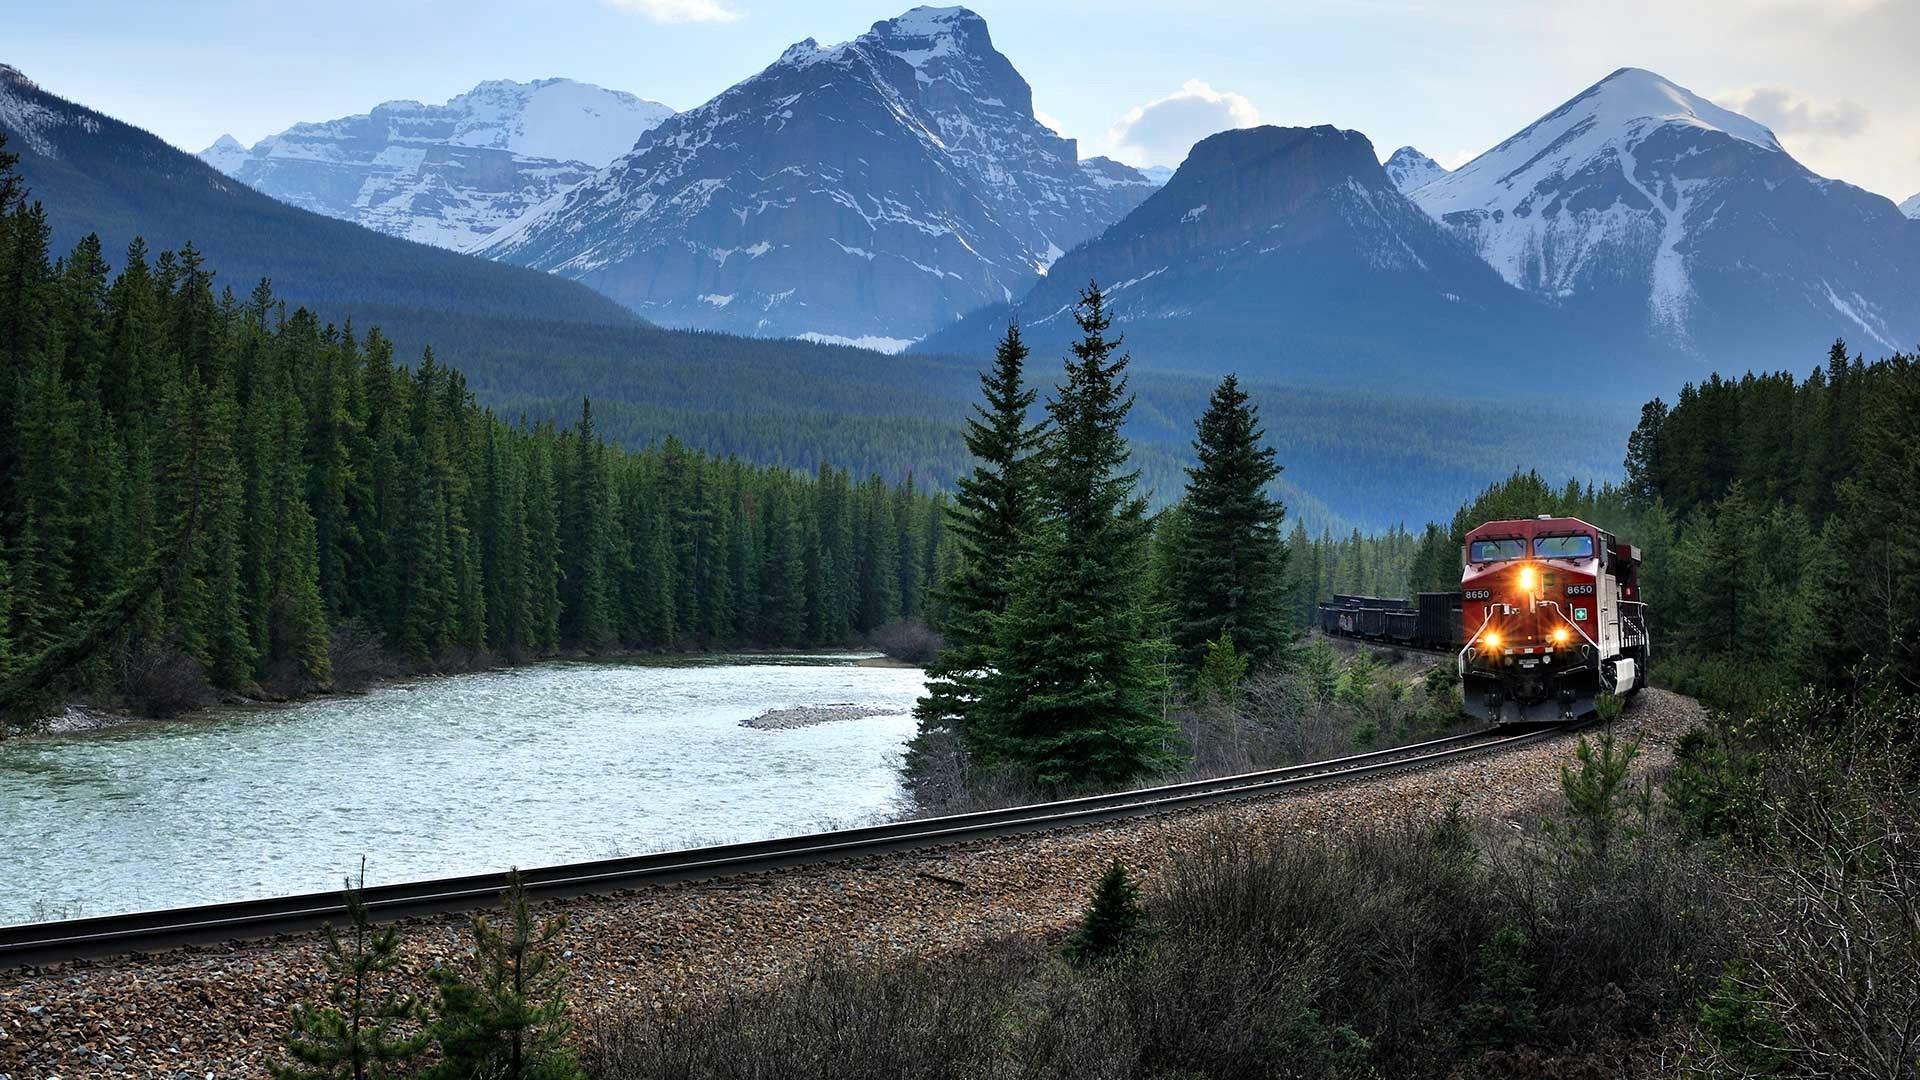 Canada, Mountains, Train, Trees 640x960 IPhone 4 4S Wallpaper